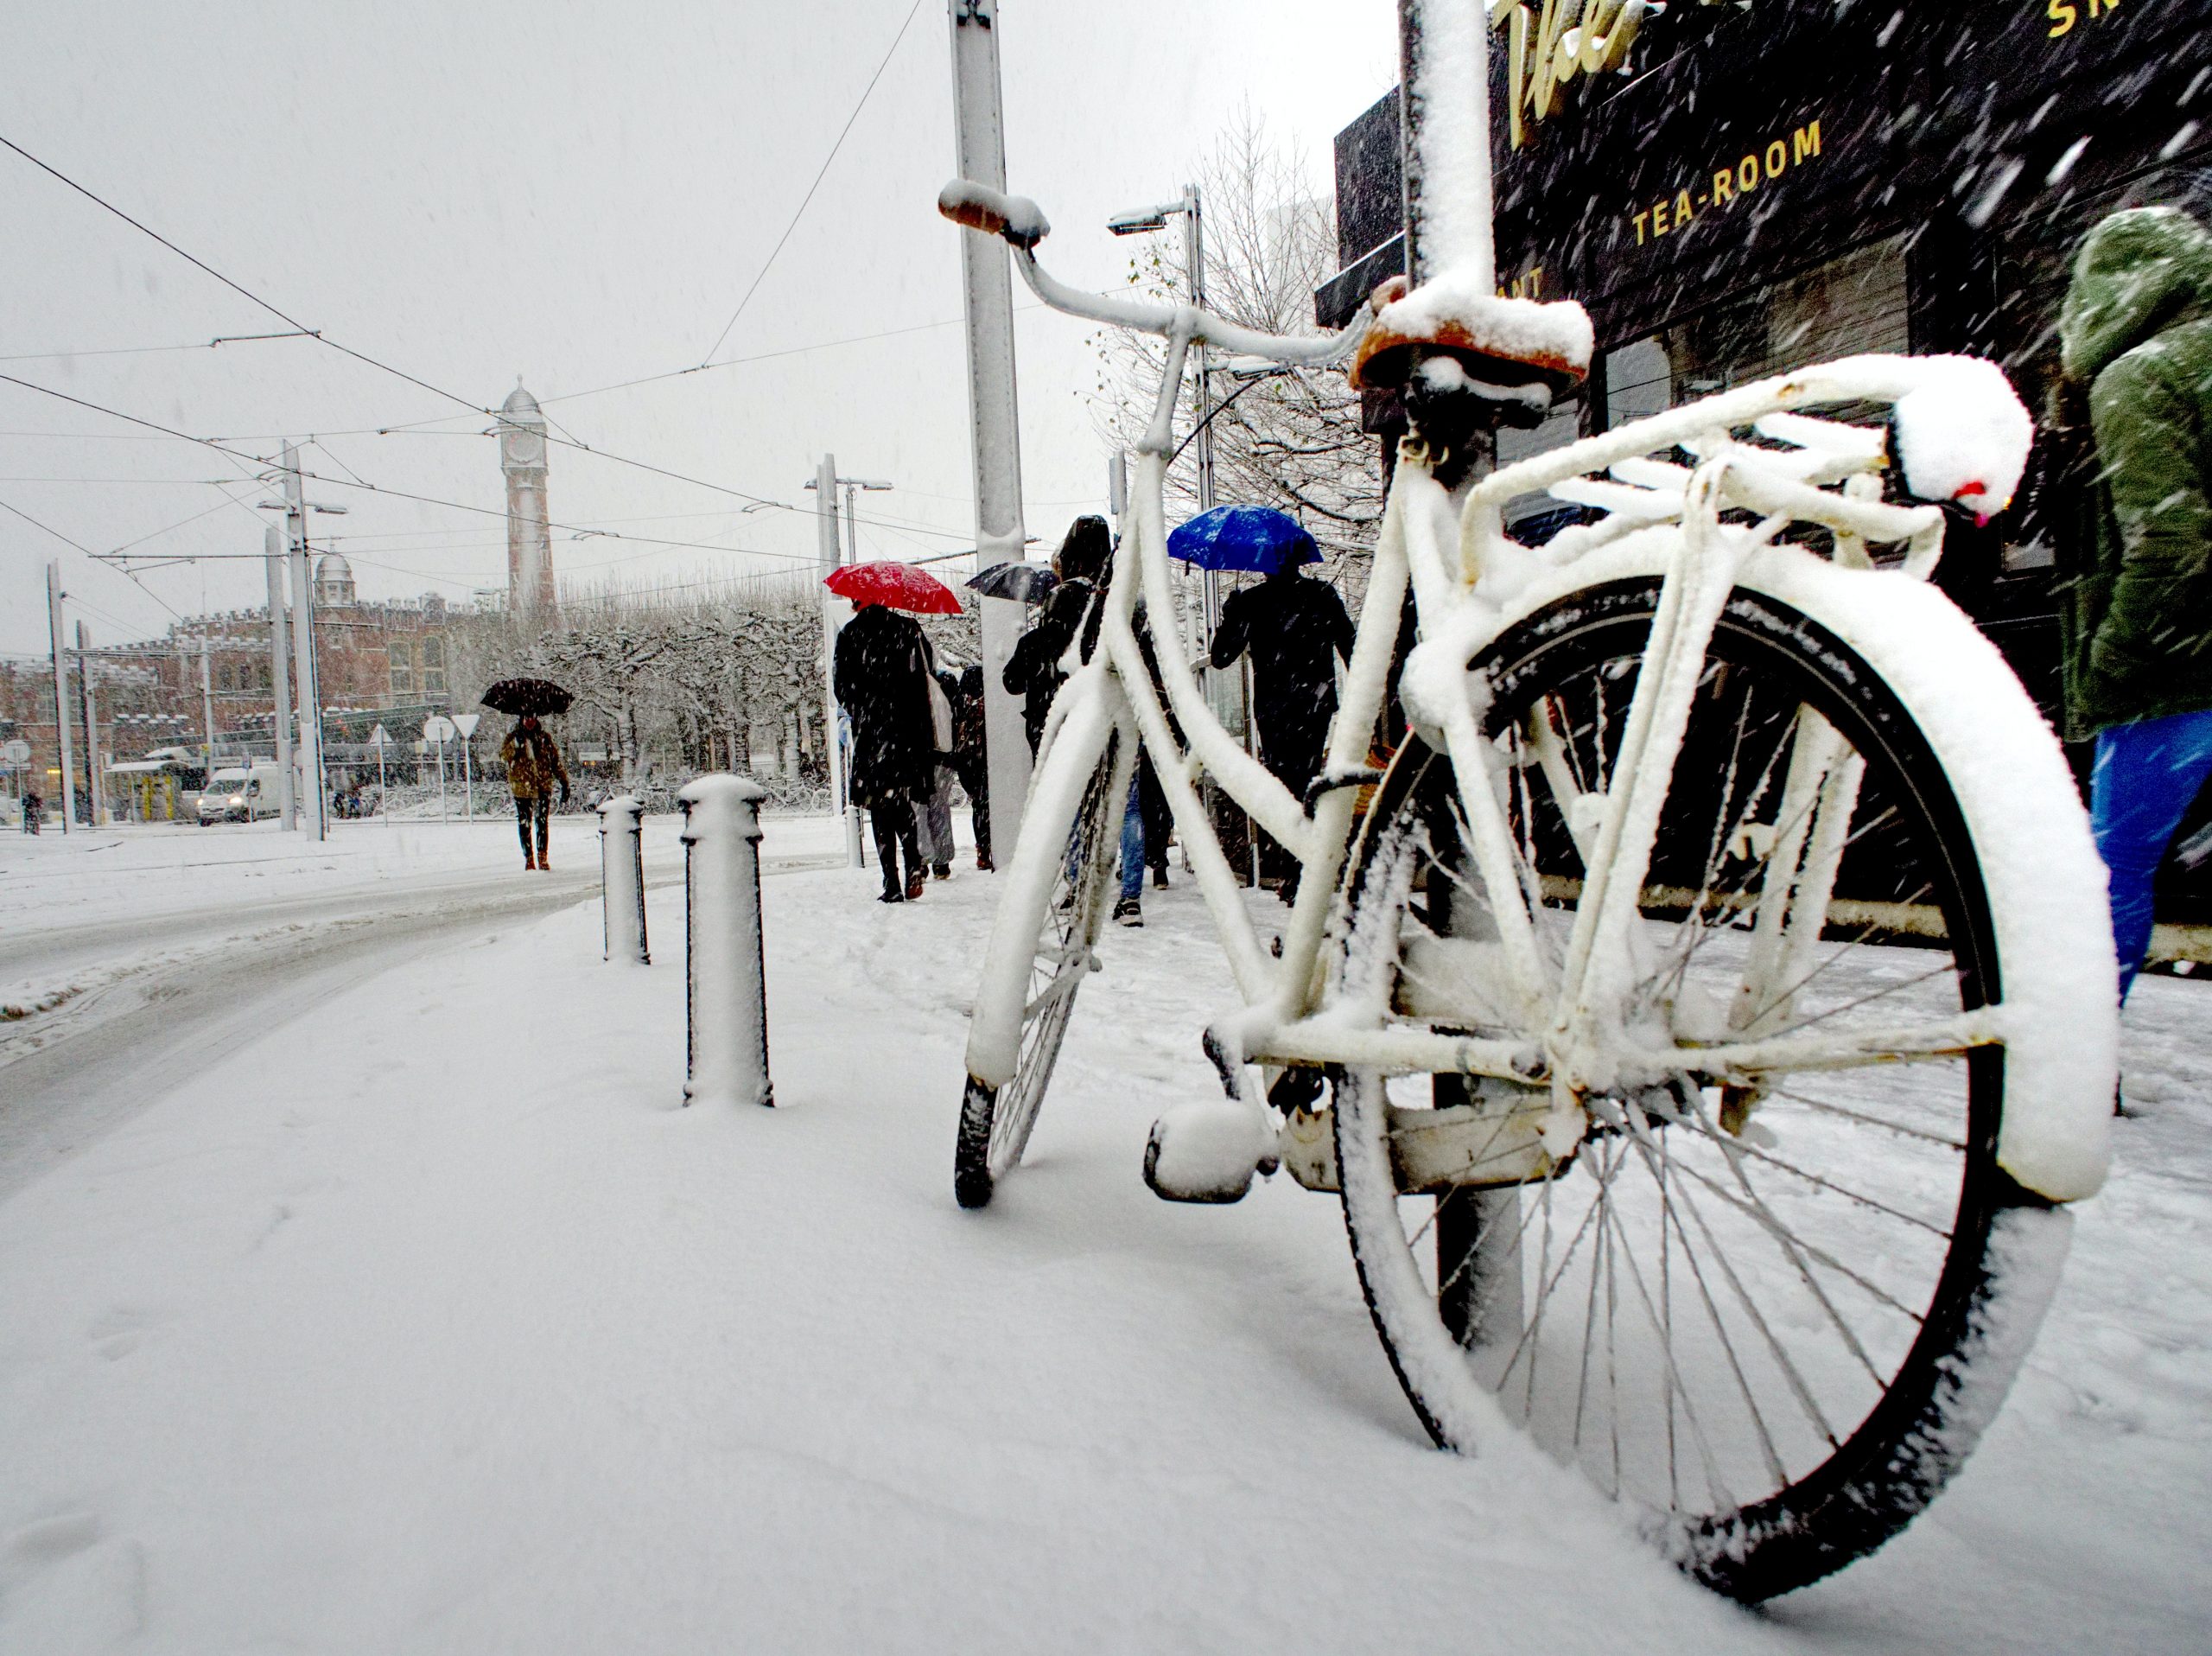 Bike Covered in Snow. Image from Pexels